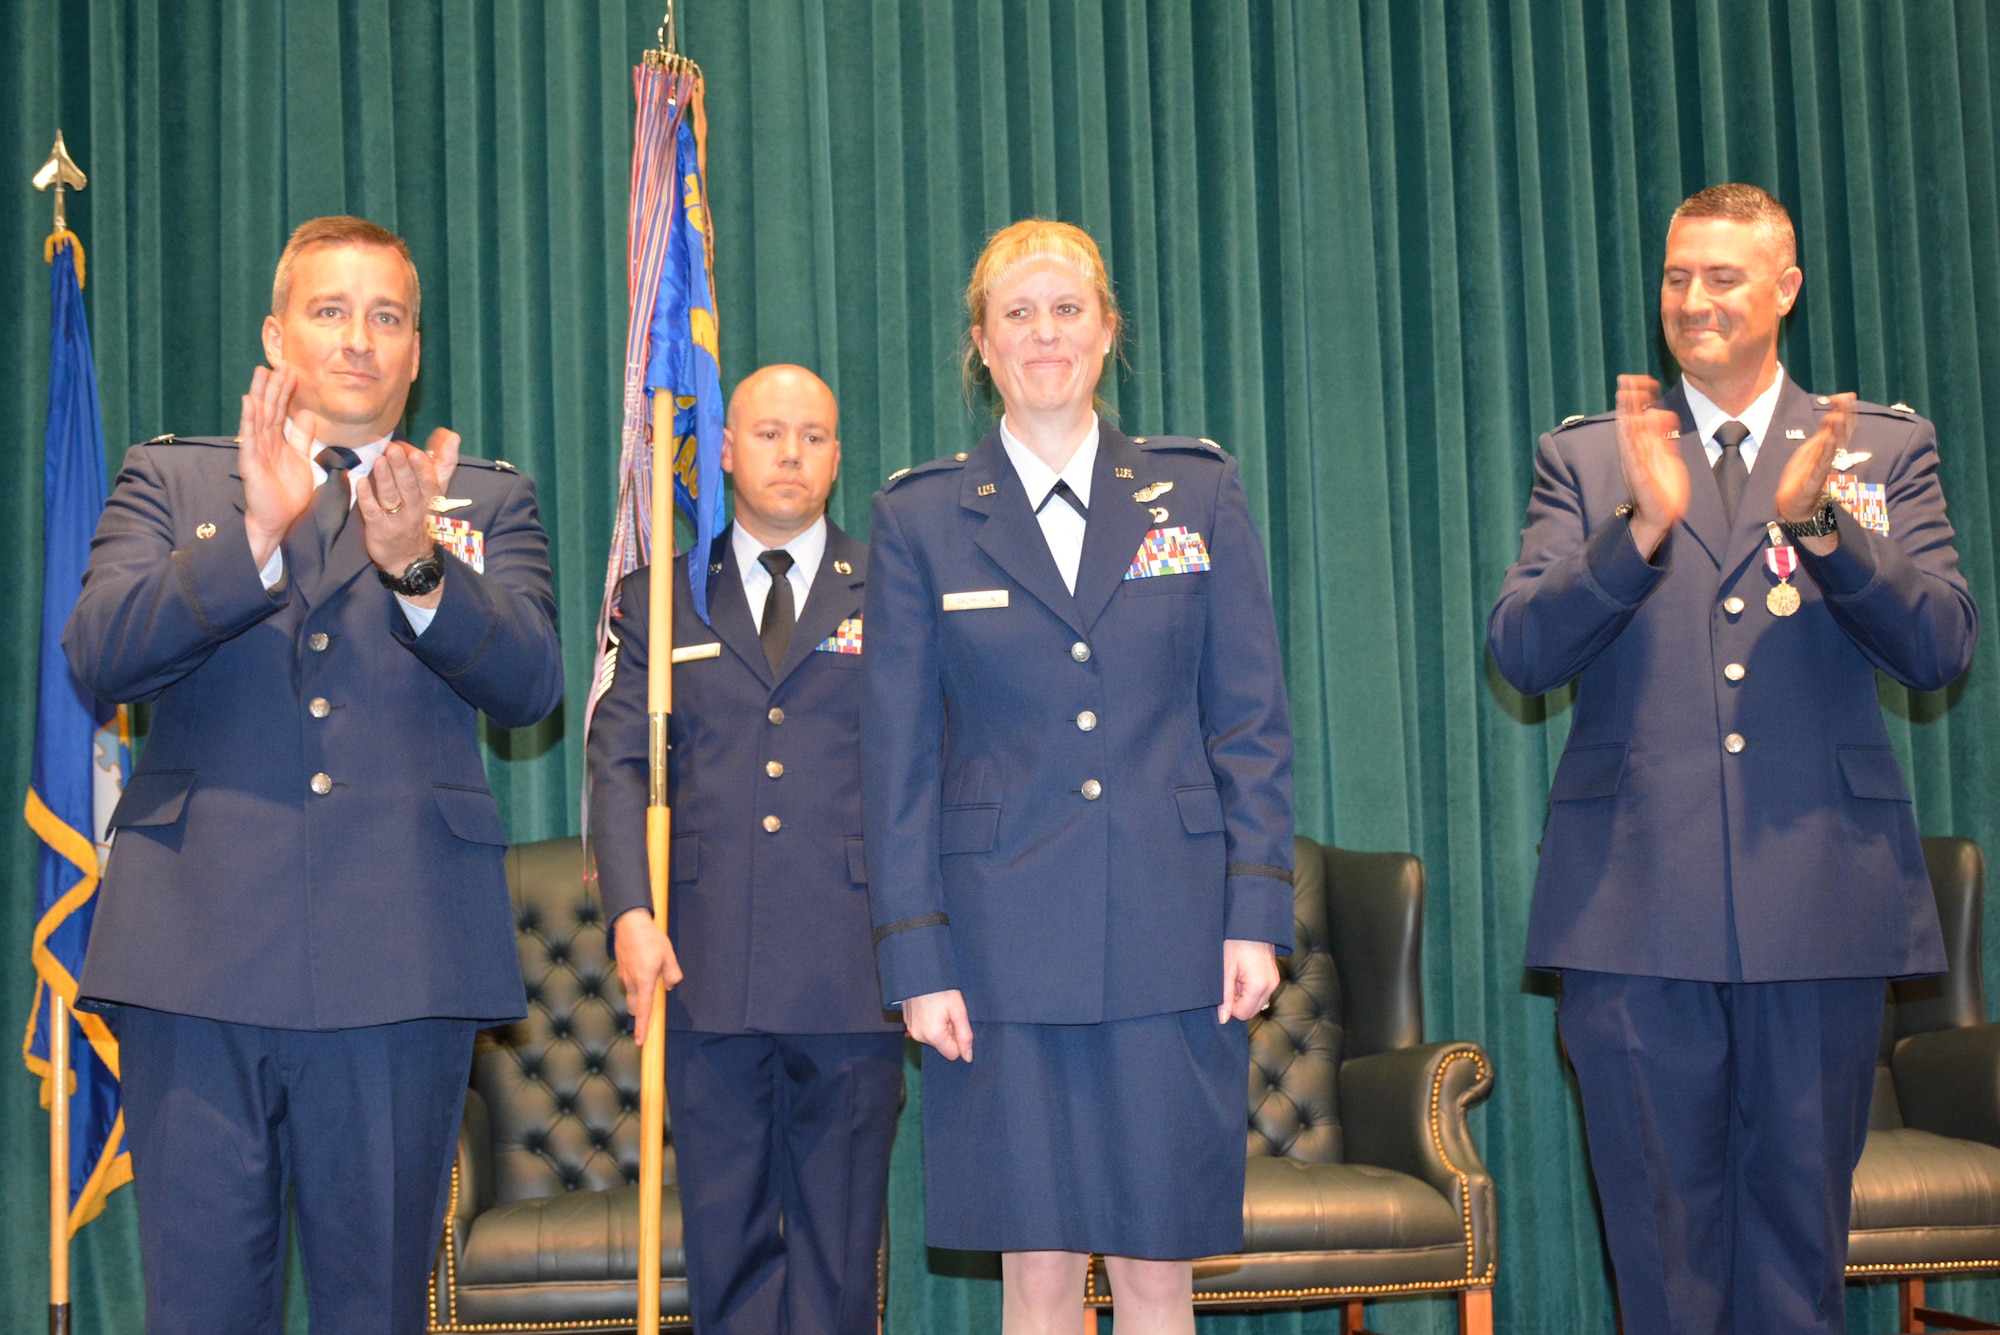 Col. Alain Poisson, 552nd Operations Group commander, left, and Lt. Col. Keven Coyle, outgoing commander of the 960th Airborne Air Control Squadron, lead the congratulatory applause for Lt. Col. Kristen D. Thompson shortly after she assumed command of the squadron during a ceremony Tuesday in Fannin Hall. Holding the guidon is 1st Sgt. Anthony Sayers, 960th AACS. Colonel Poisson presided over the ceremony attended by approximately 100 family members, friends and co-workers. (Air Force photo by Darren D. Heusel/Released)